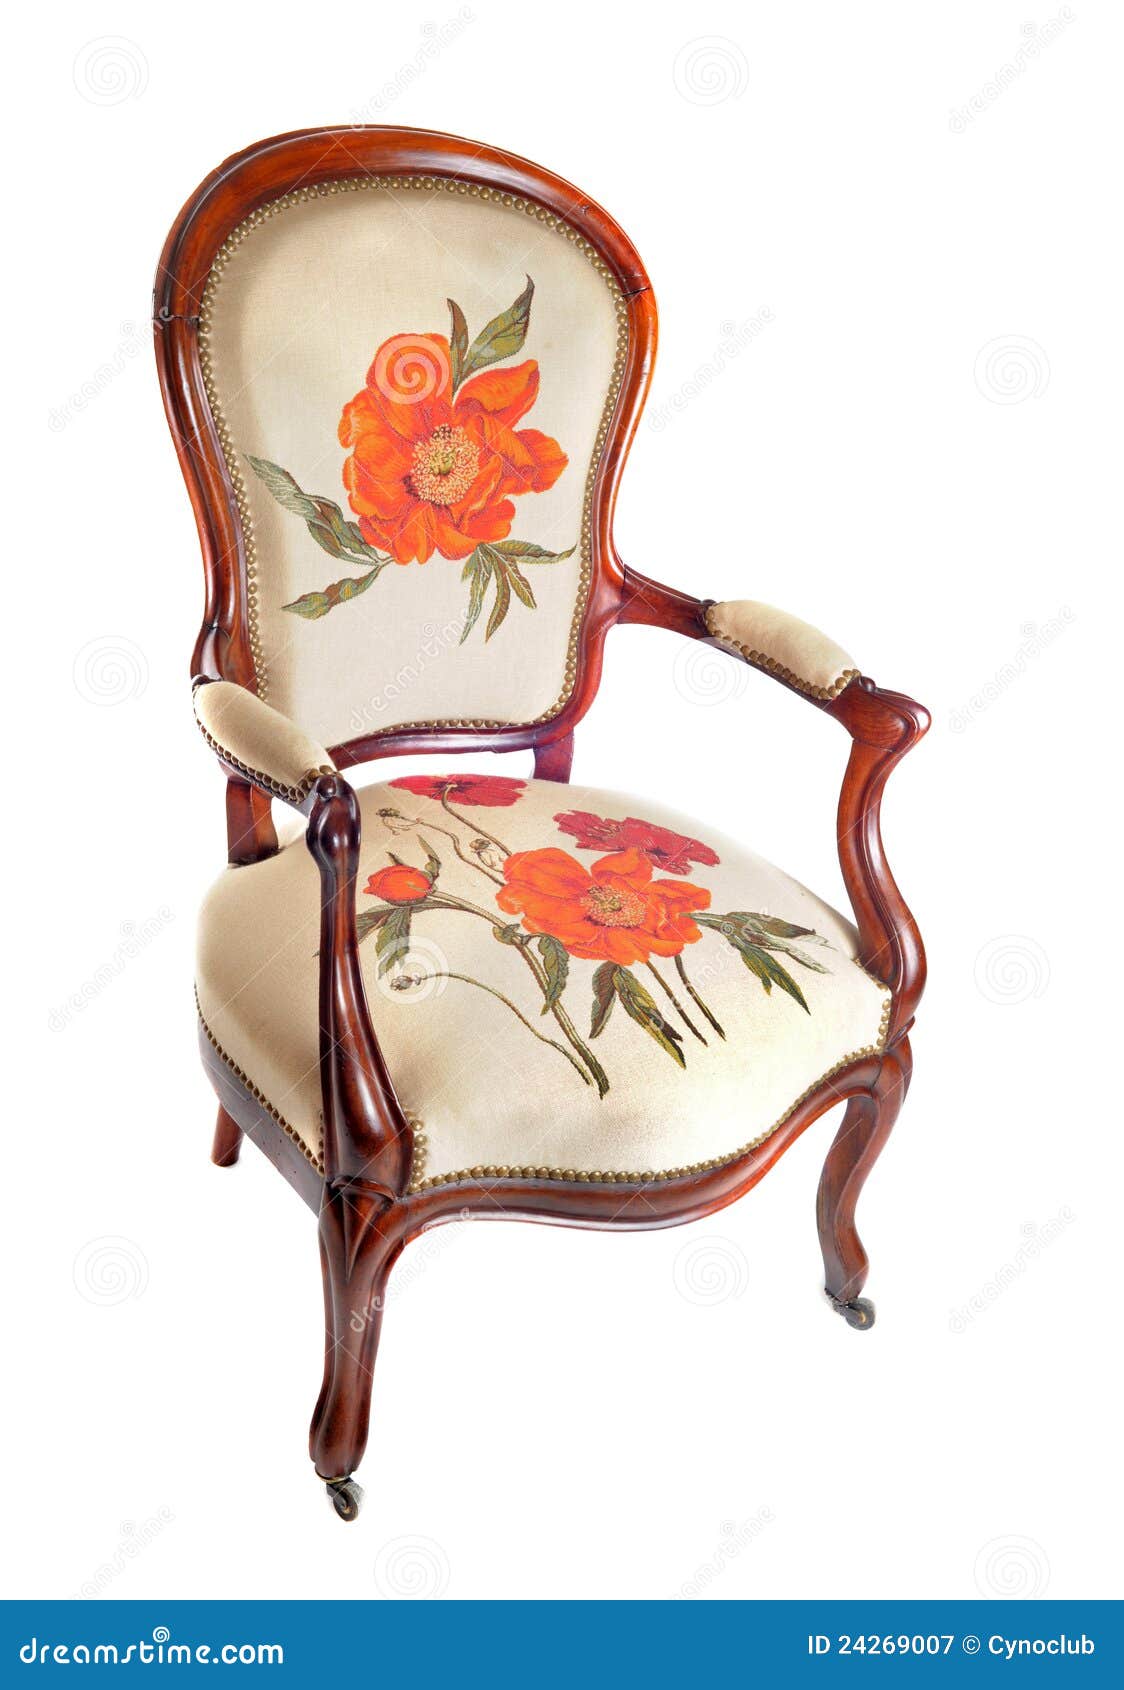 Antique Chair Royalty Free Stock Photography - Image: 24269007